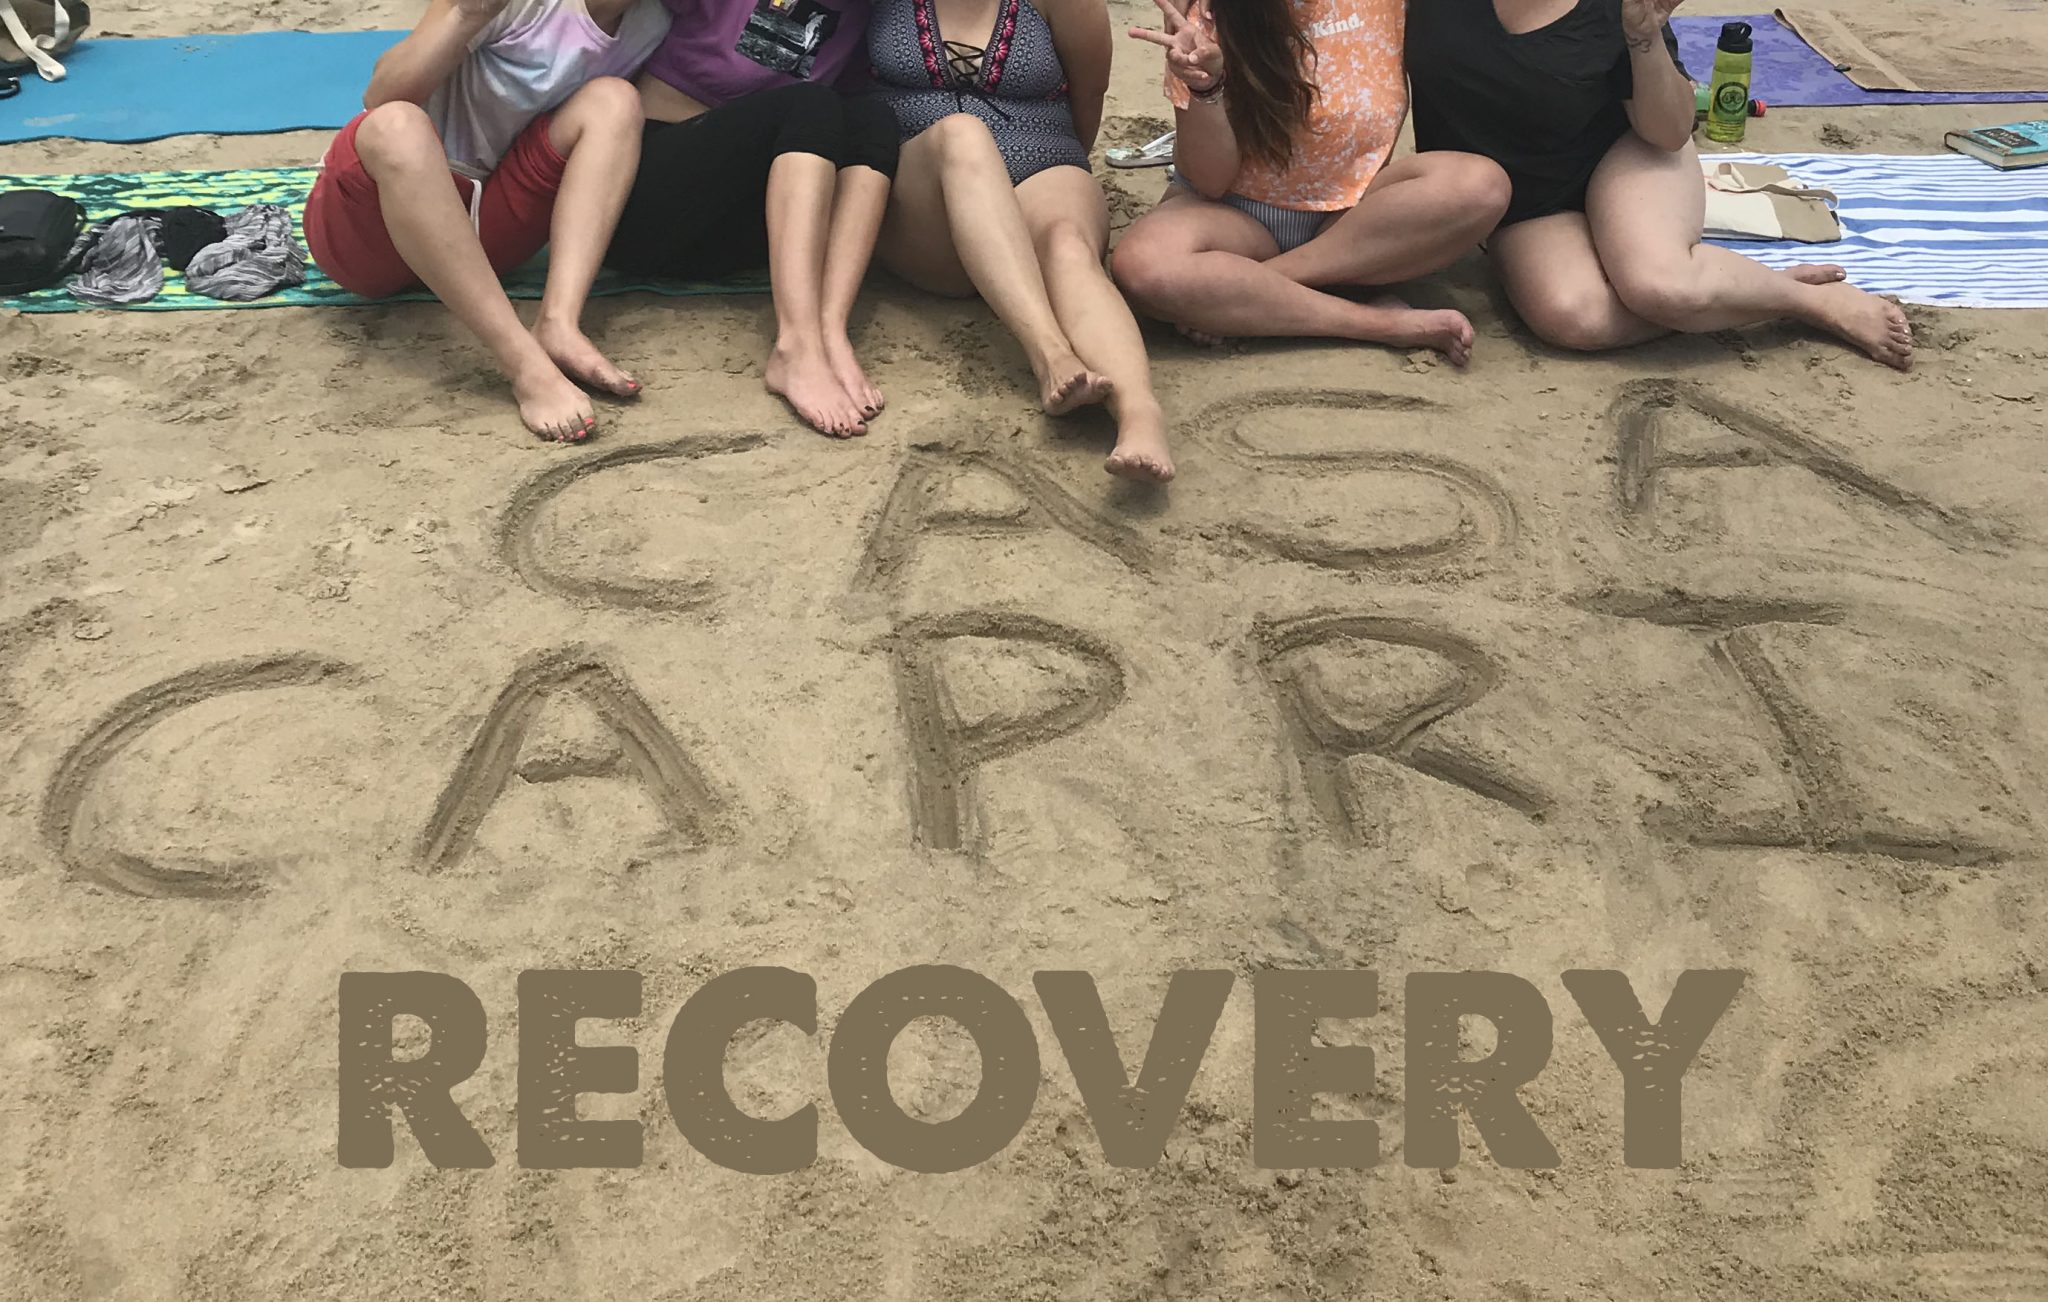 Group of Women in Recovery